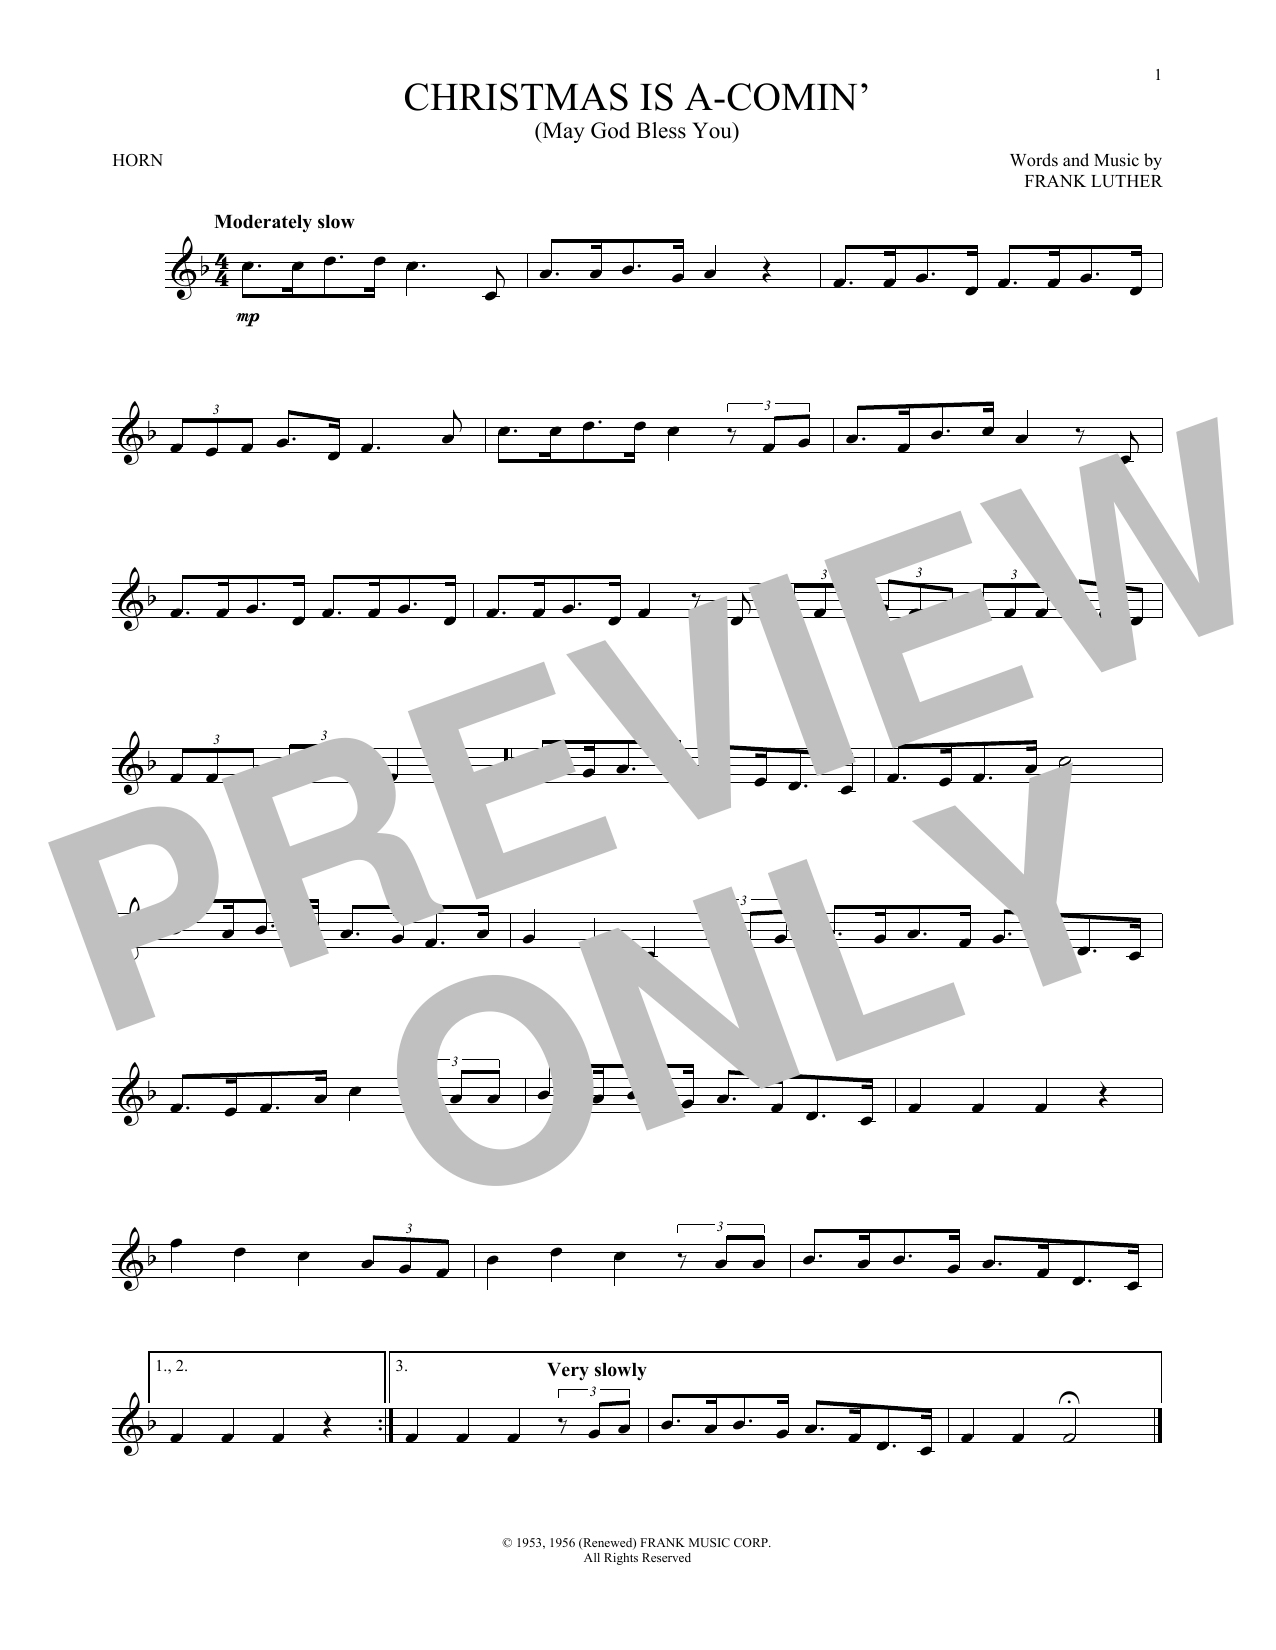 Download Frank Luther Christmas Is A-Comin' (May God Bless Yo Sheet Music